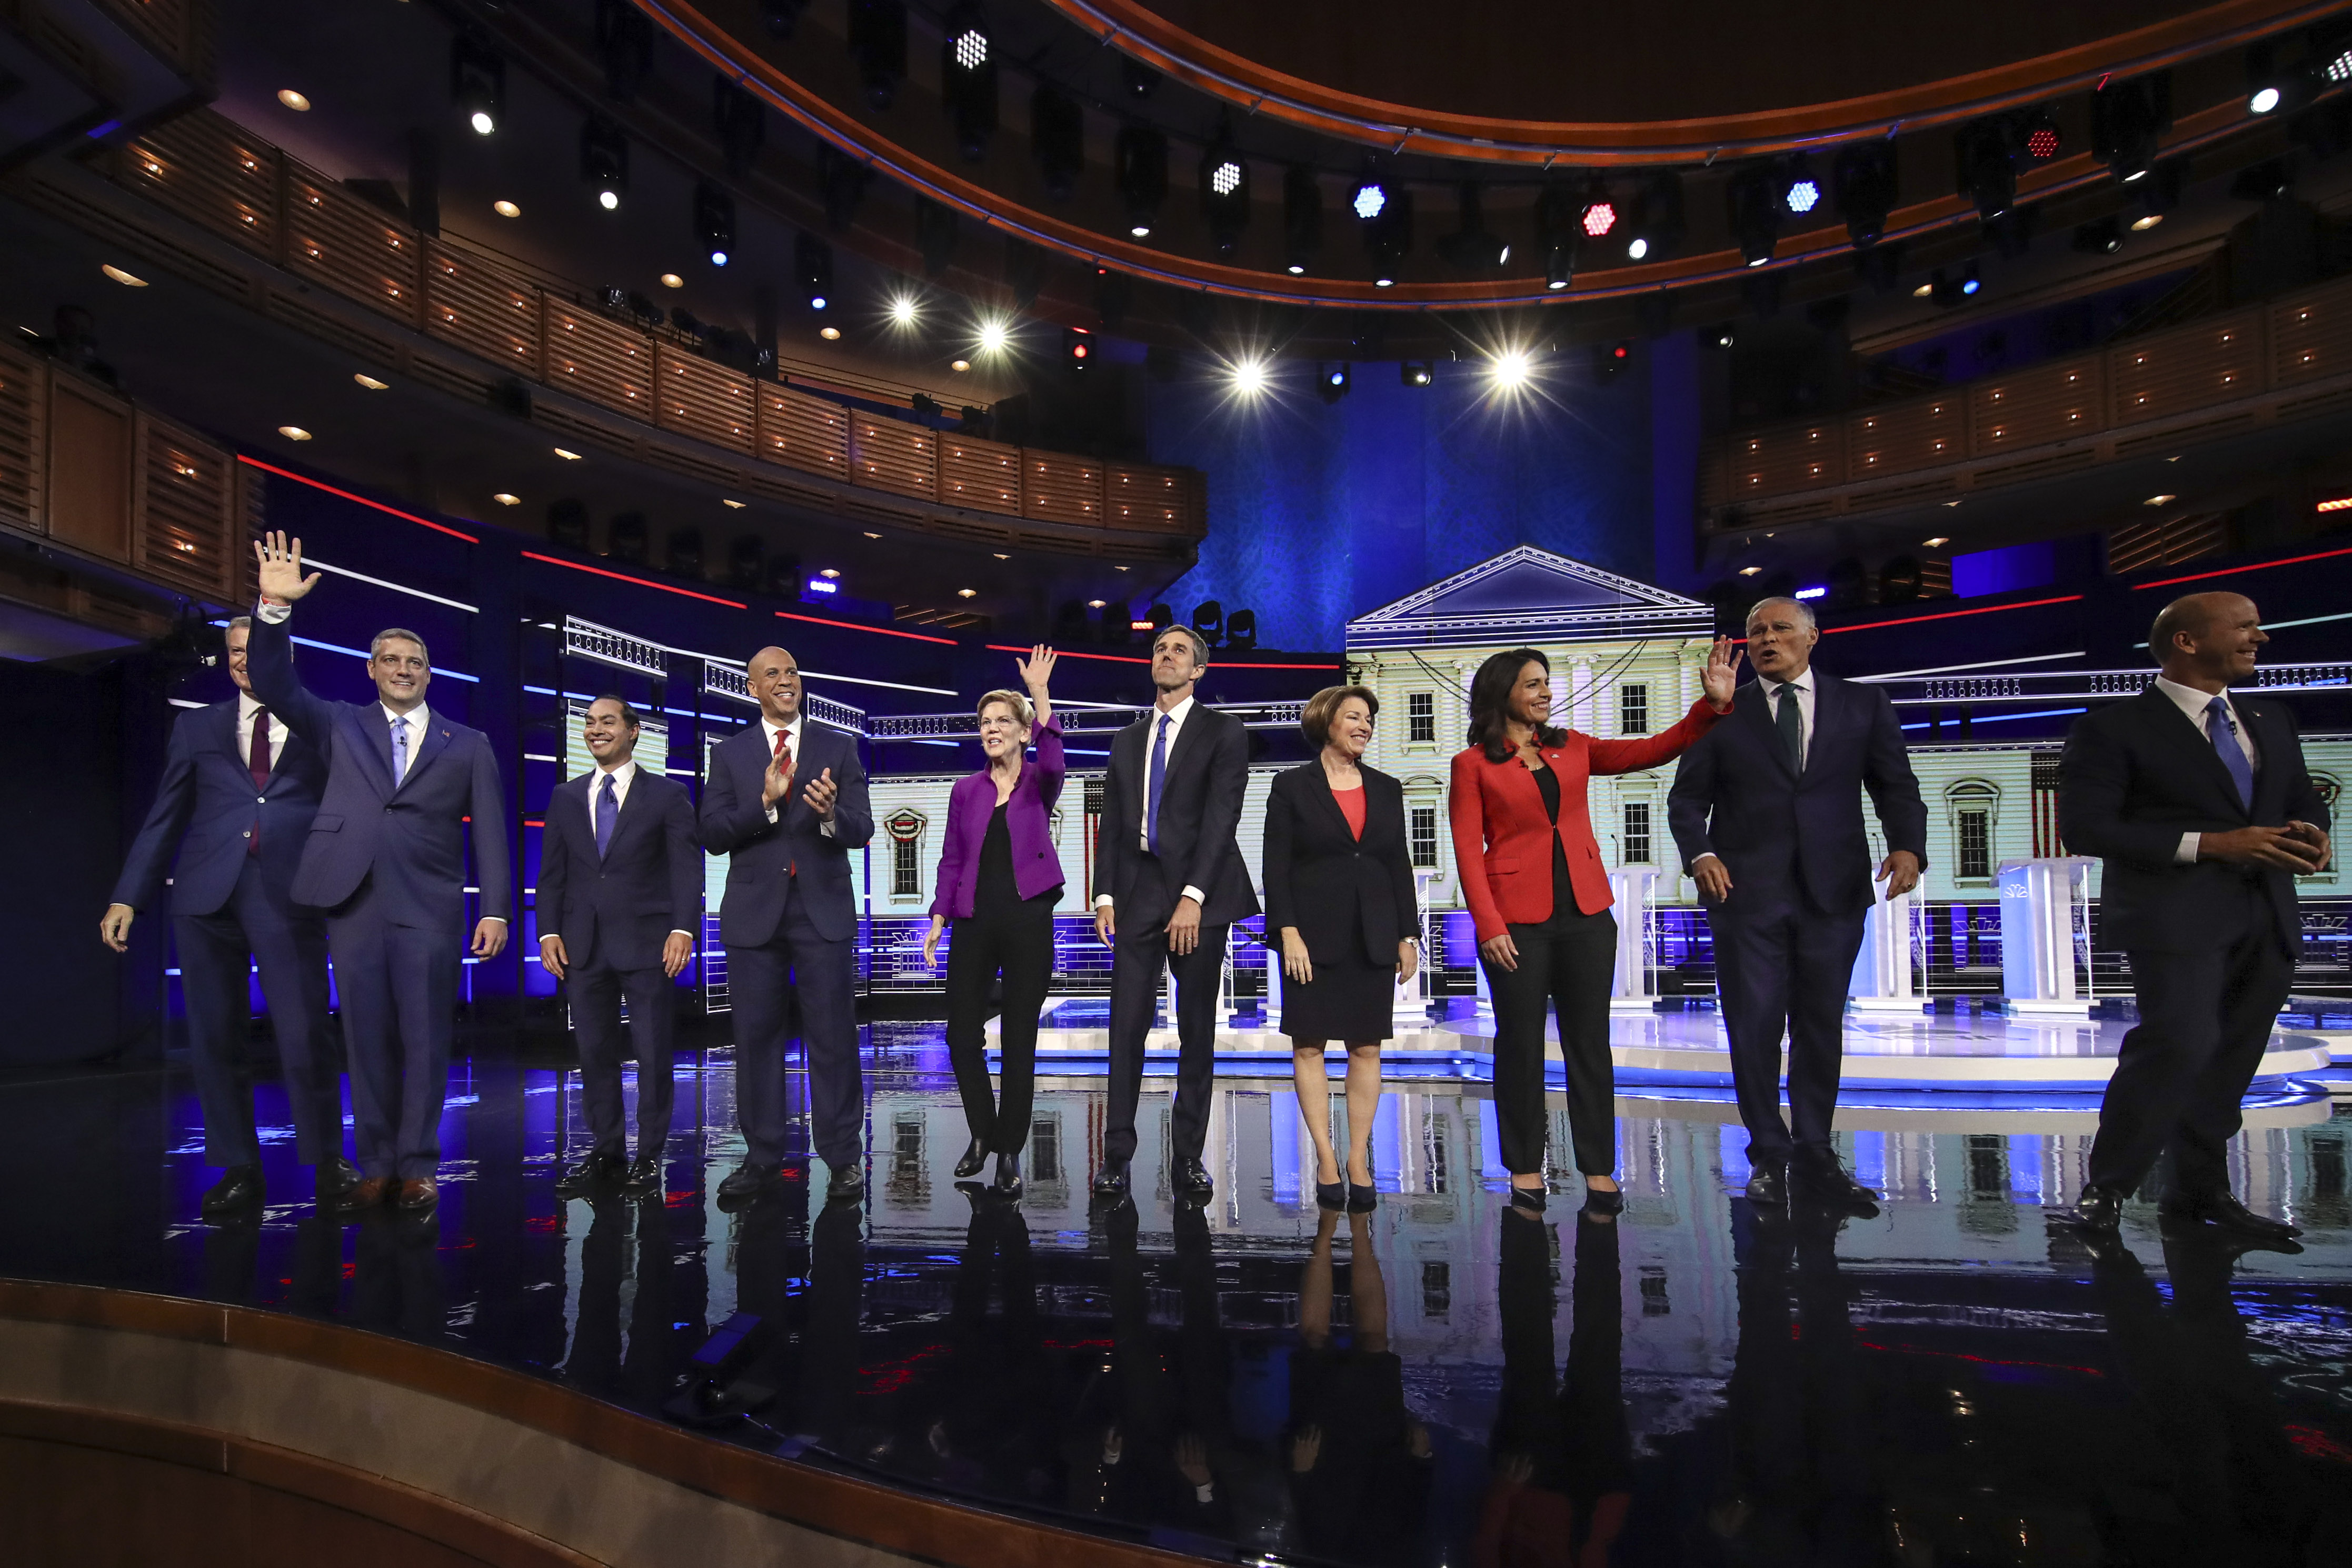 Democratic presidential candidates take the stage on June 26, 2019 in Miami, Florida. (Drew Angerer/Getty Images)